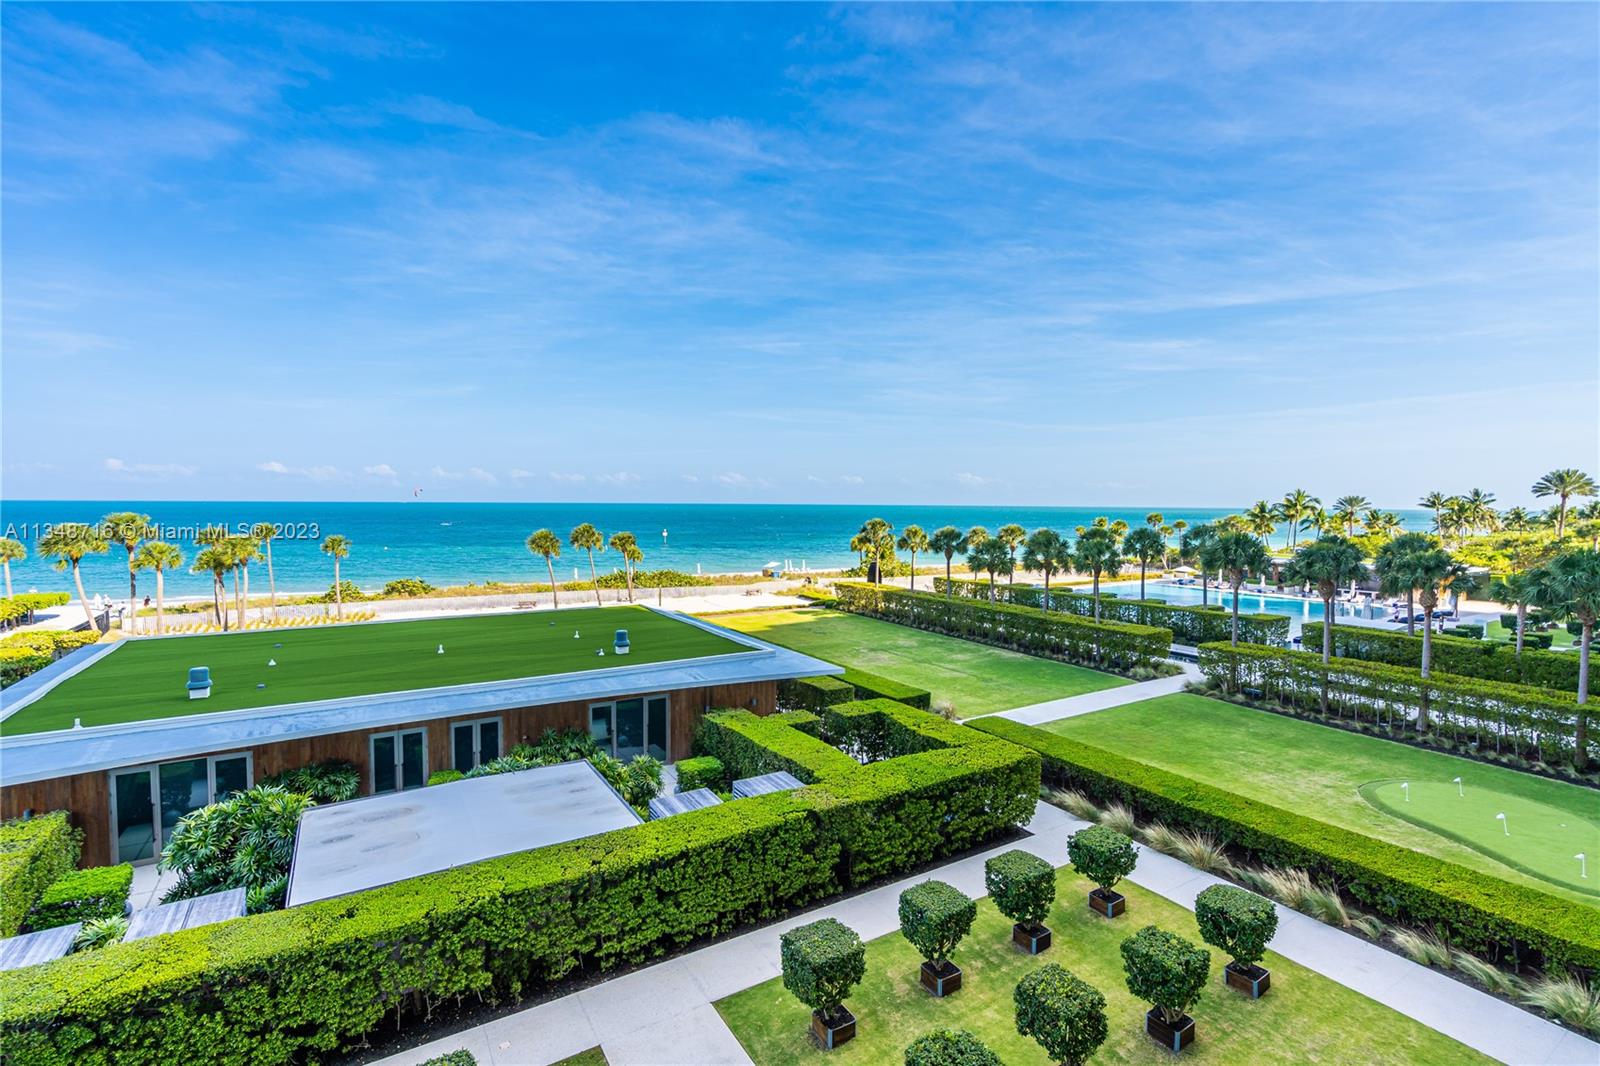 One of a kind world class OCEANA is located directly 400 linear feet of Atlantic beachfront. Invest or live in the most luxurious buildings in Key Biscayne, offering modern architecture design is the place to be. This amazing NORTH corner unit has  3 bedrooms, a service room, 6 baths, large laundry room and a huge wrap around balcony. Kitchen with white quartz countertops, master chef double over, whole bean coffee system and wine cooler. The unis has a private elevator foyer with a split bedroom floor plan. Enjoy the beach, pool, lap pool, beach volleyball, tennis court, biking, spa, gym, full service and more. And a beach Mediterranean restaurant will full service to the apartments. Business center and media room available to schedule for work meetings.